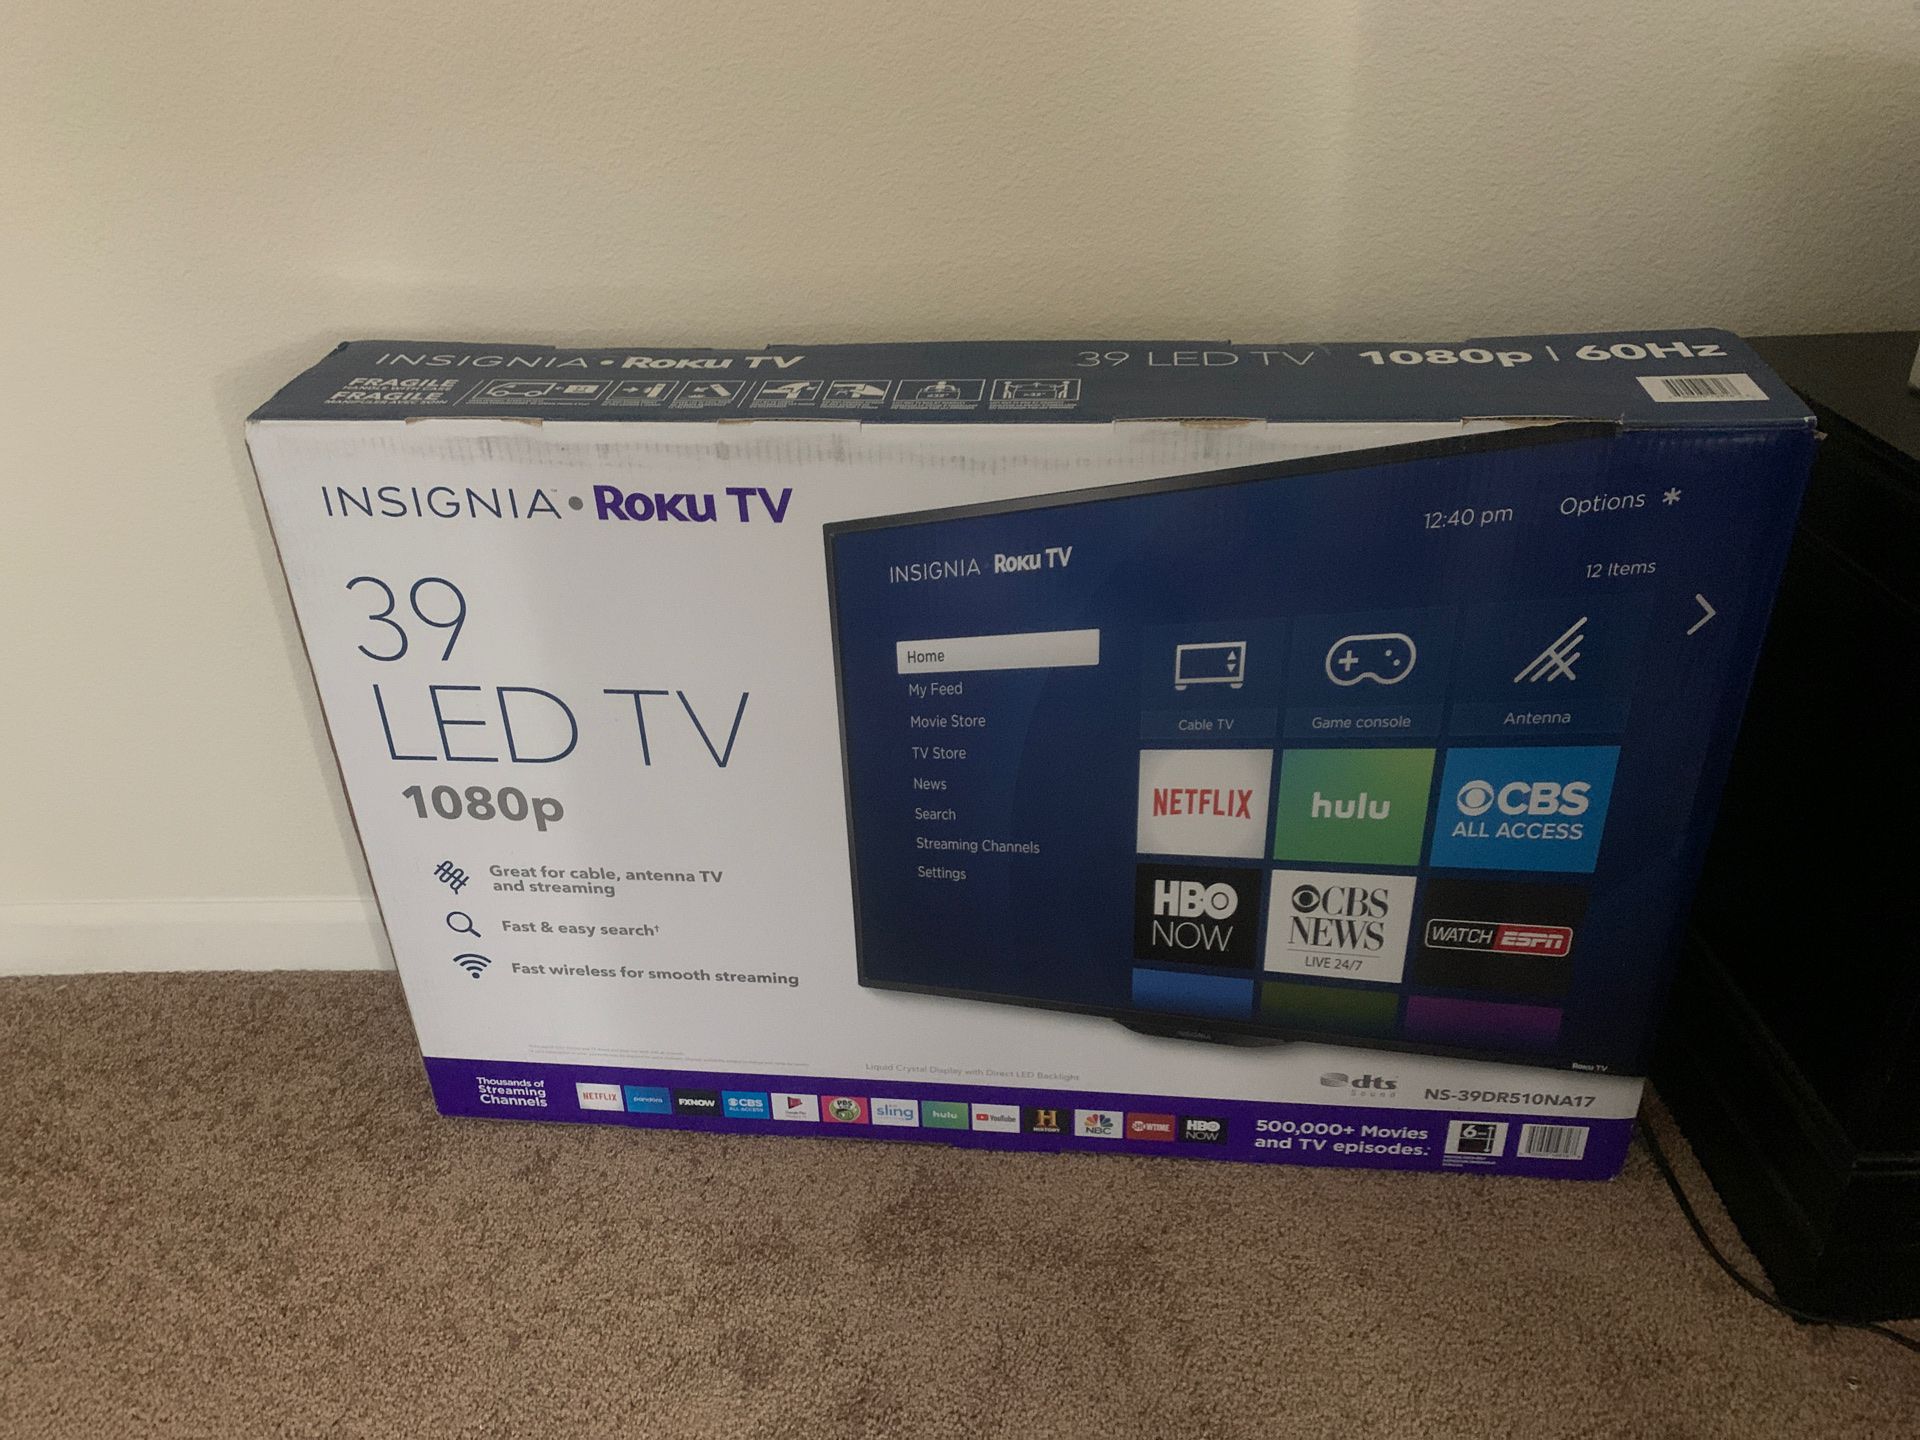 PICK UP ONLY Brand new Insignia Roku Tv 39 LED TV 1080p